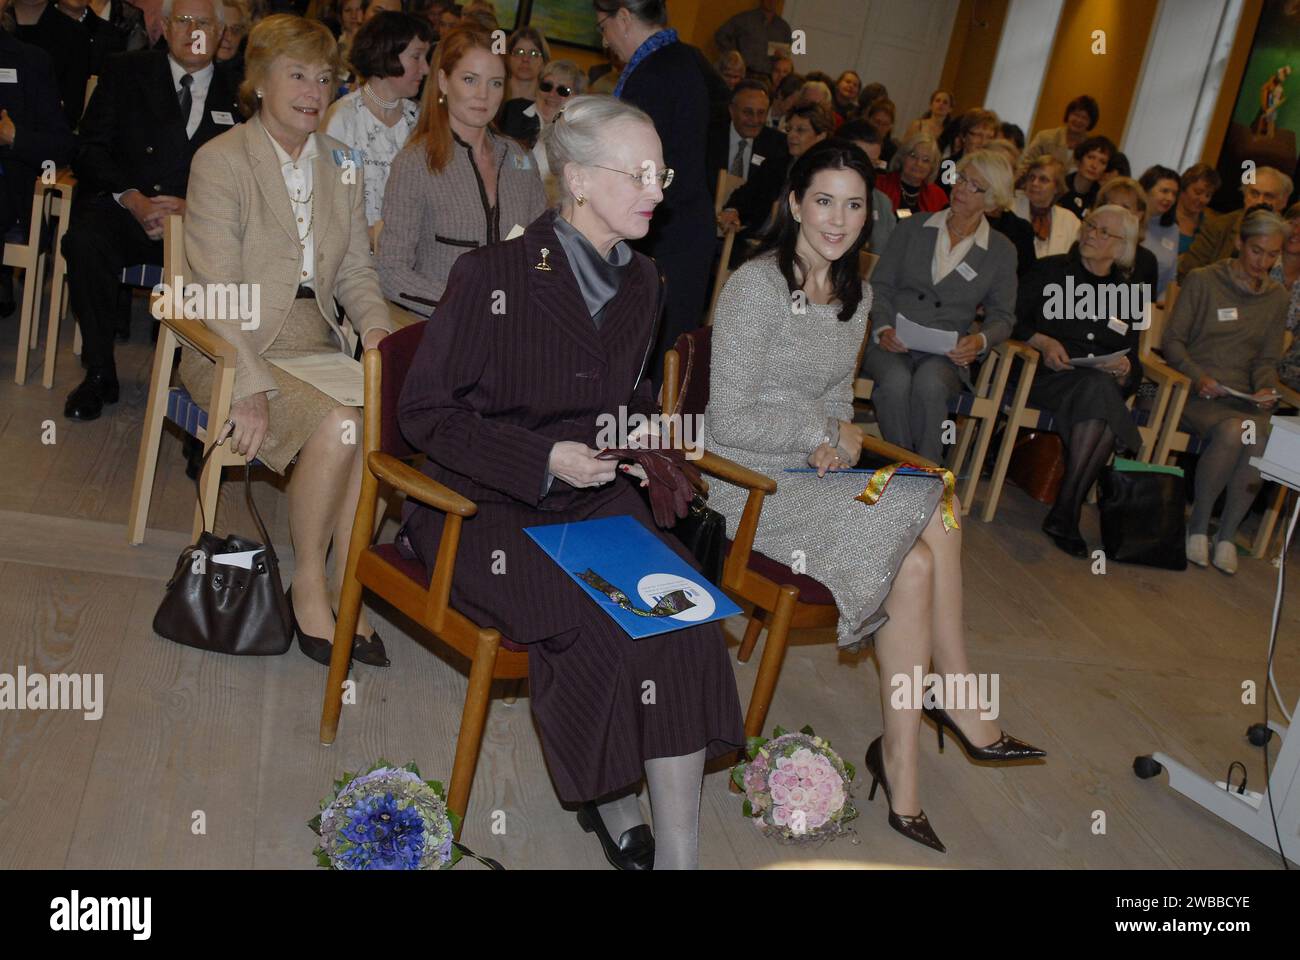 H.M.The Queen Margrethe & Crown princess Mary Donaldson together attended ICOM Costume meeting A glimpse of Danish Costume History at Vortov grundvig insitute in Copenhagen Denmark Oct.9,2006      (Photo by Francis Dean/Dean Pictures) Stock Photo